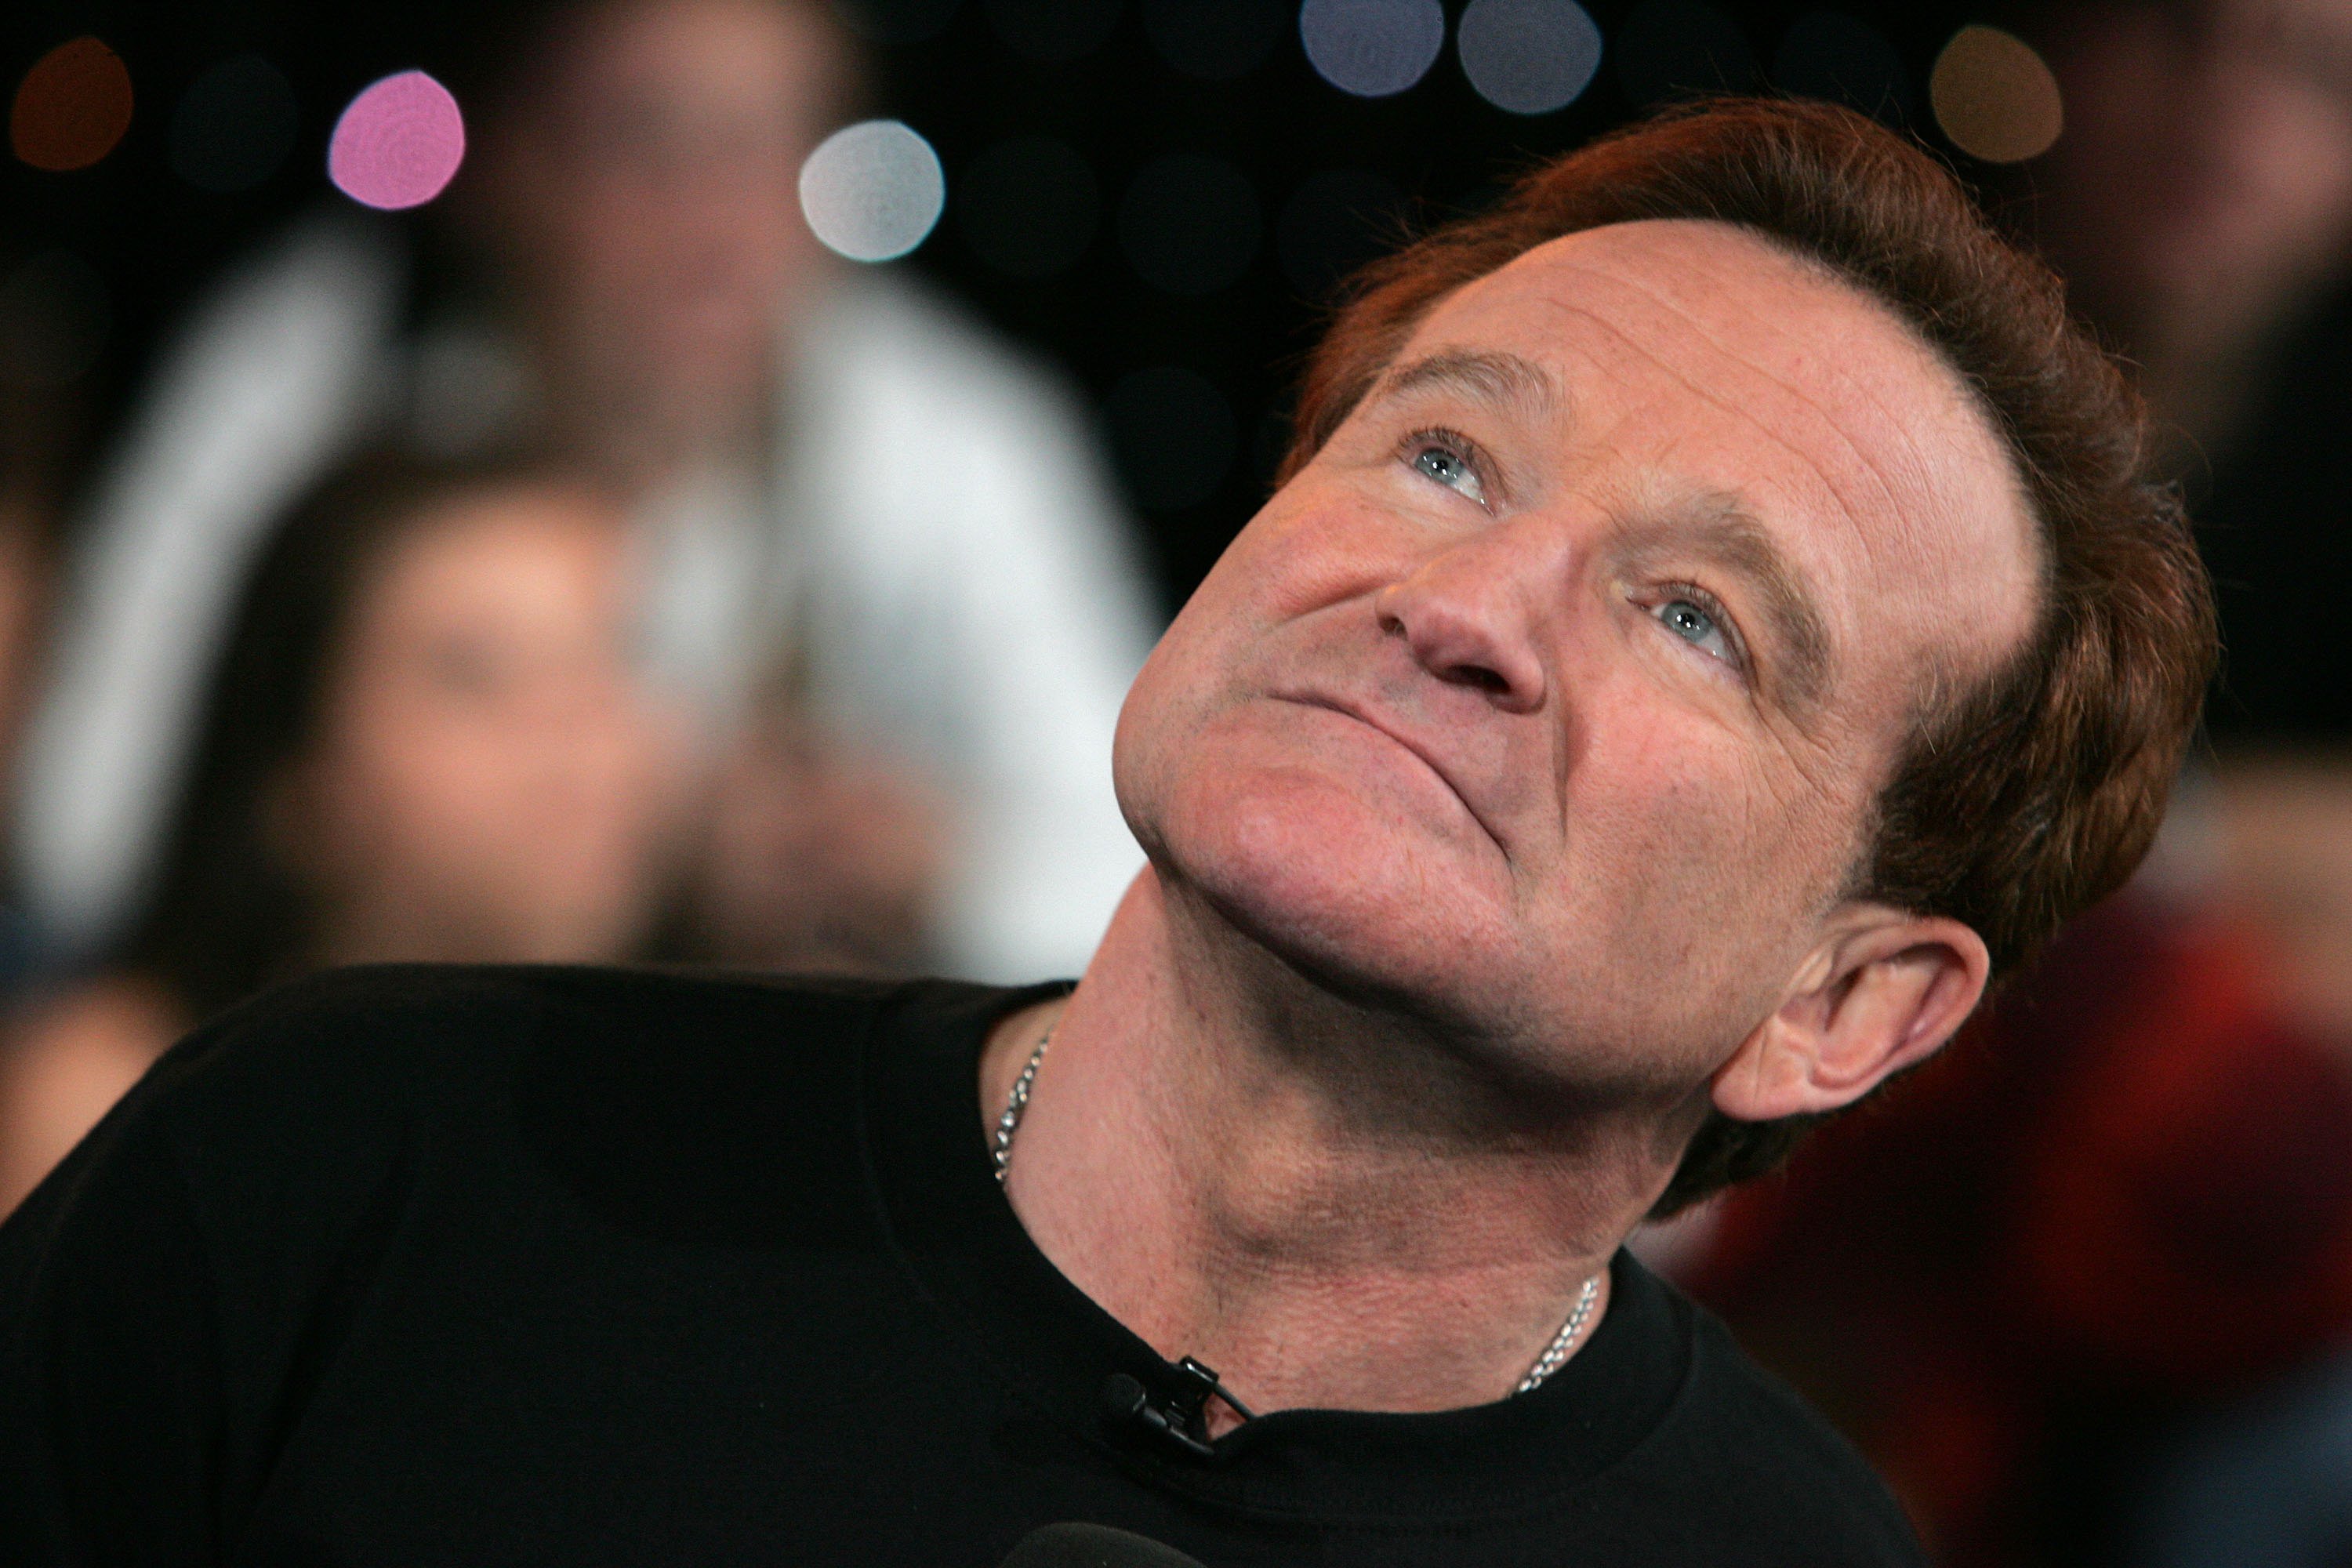 Robin Williams appears onstage during MTV's Total Request Live at the MTV Times Square Studios on April 27, 2006 in New York City | Source: Getty Images